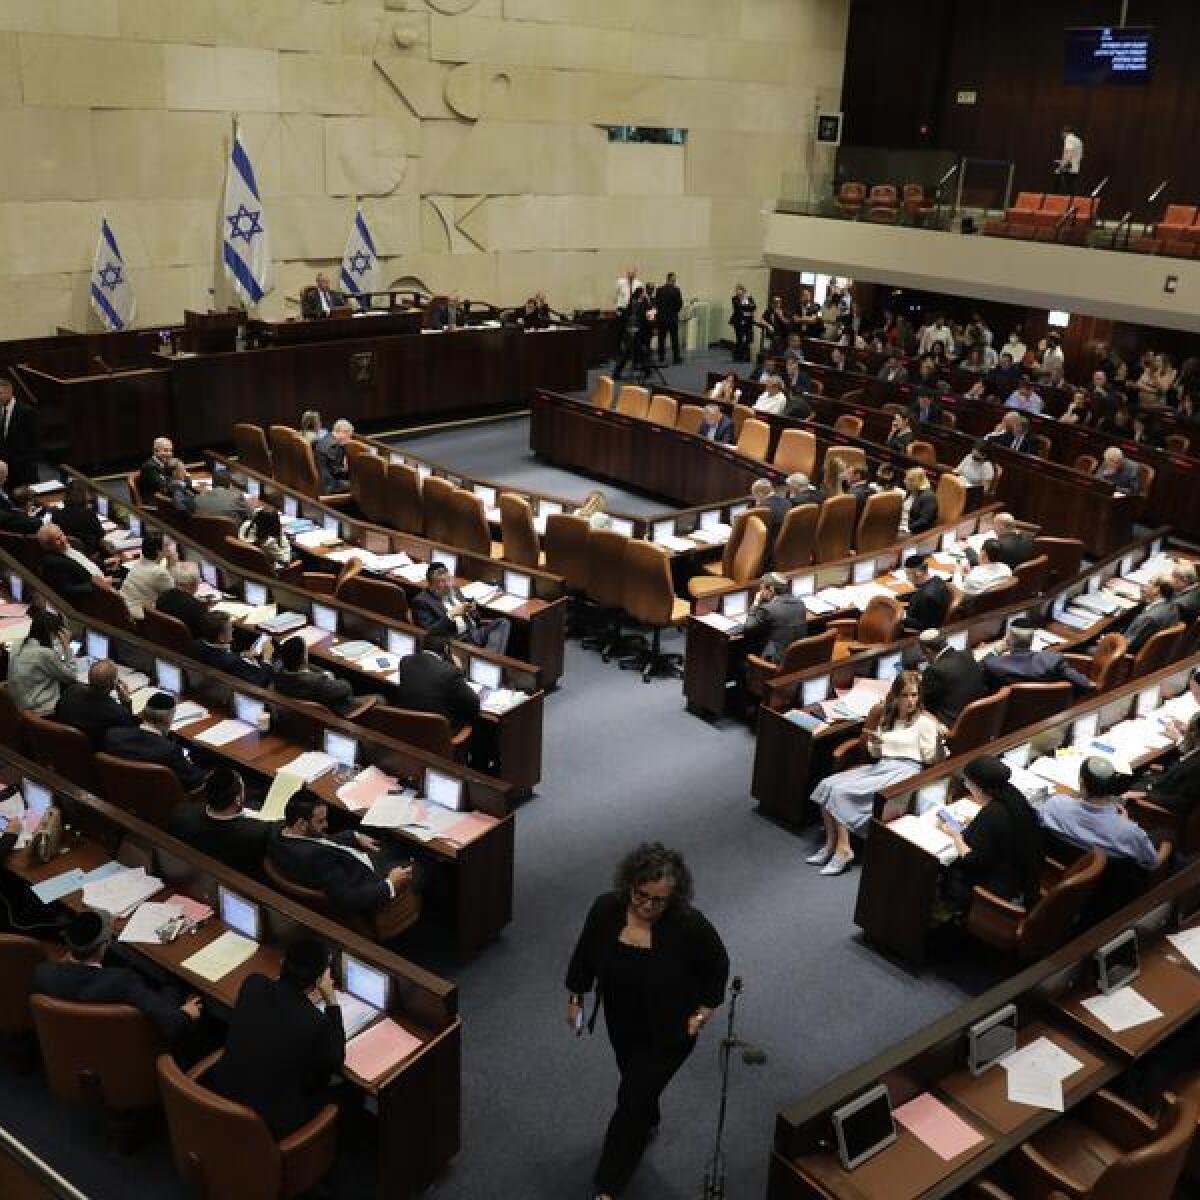 Knesset members take part in the vote to dissolve parliament.